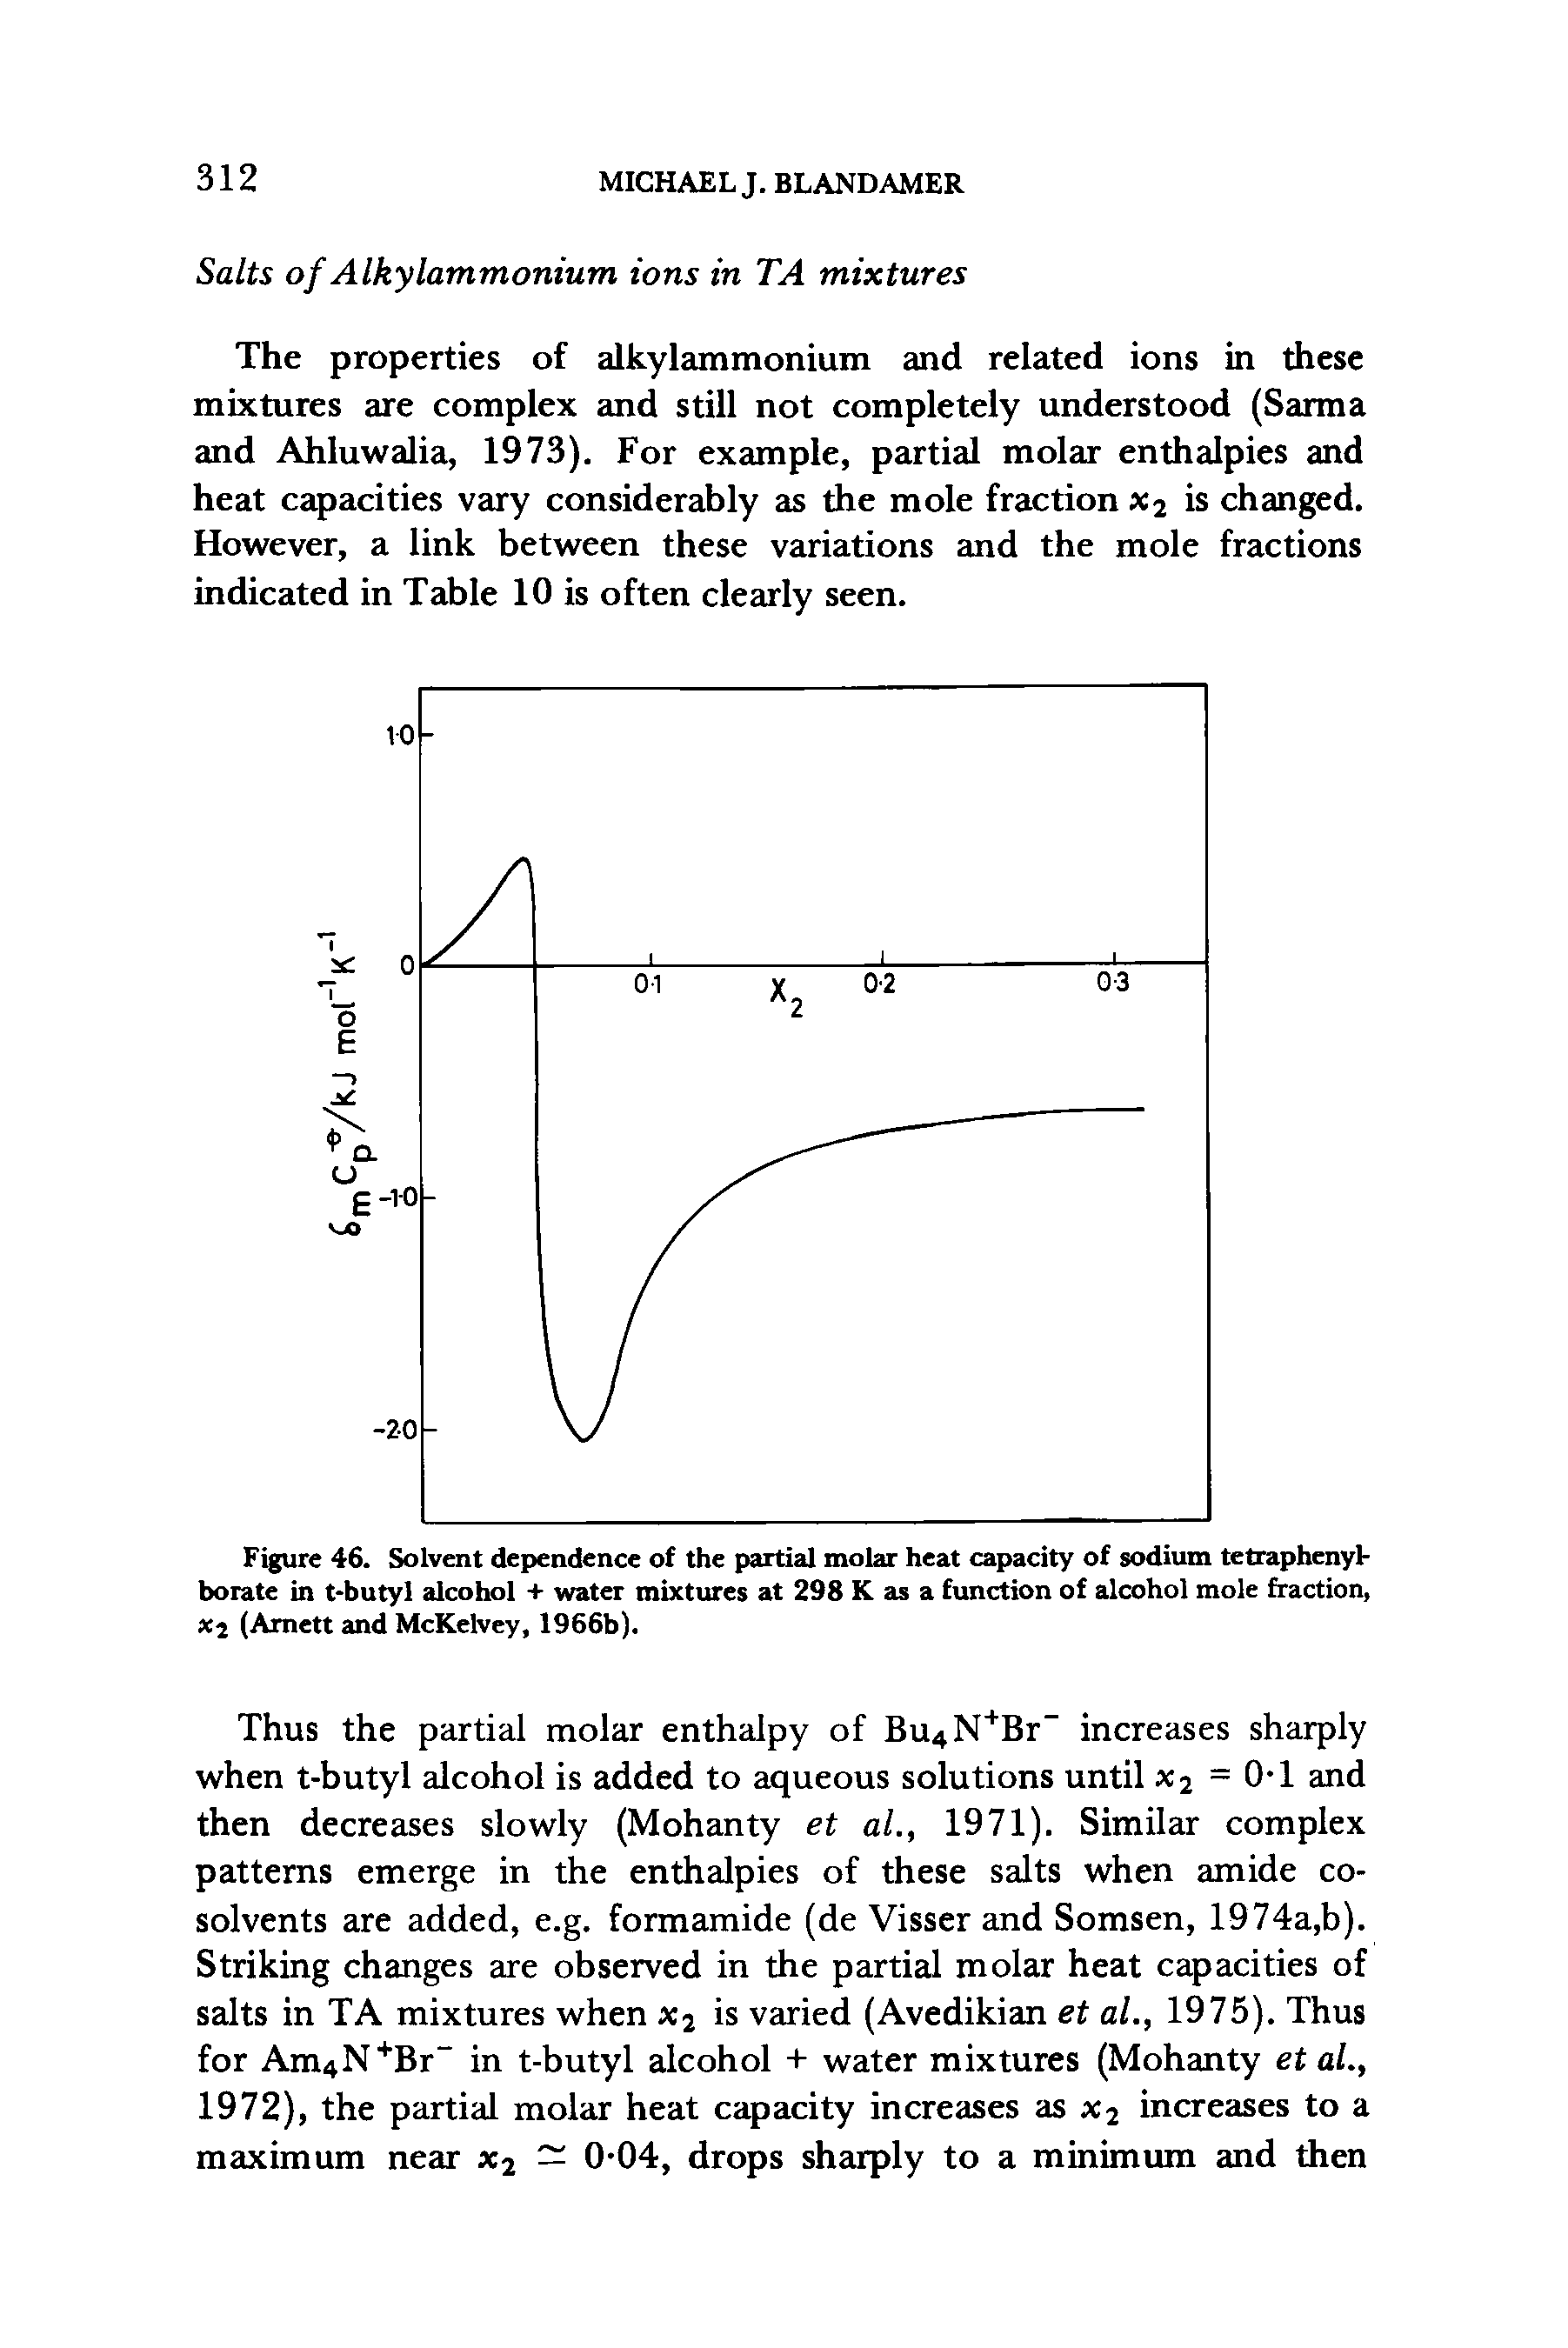 Figure 46. Solvent dependence of the partial molar heat capacity of sodium tetraphenyl-borate in t-butyl alcohol + water mixtures at 298 K as a function of alcohol mole fraction, xj (Arnett and McKelvey, 1966b).